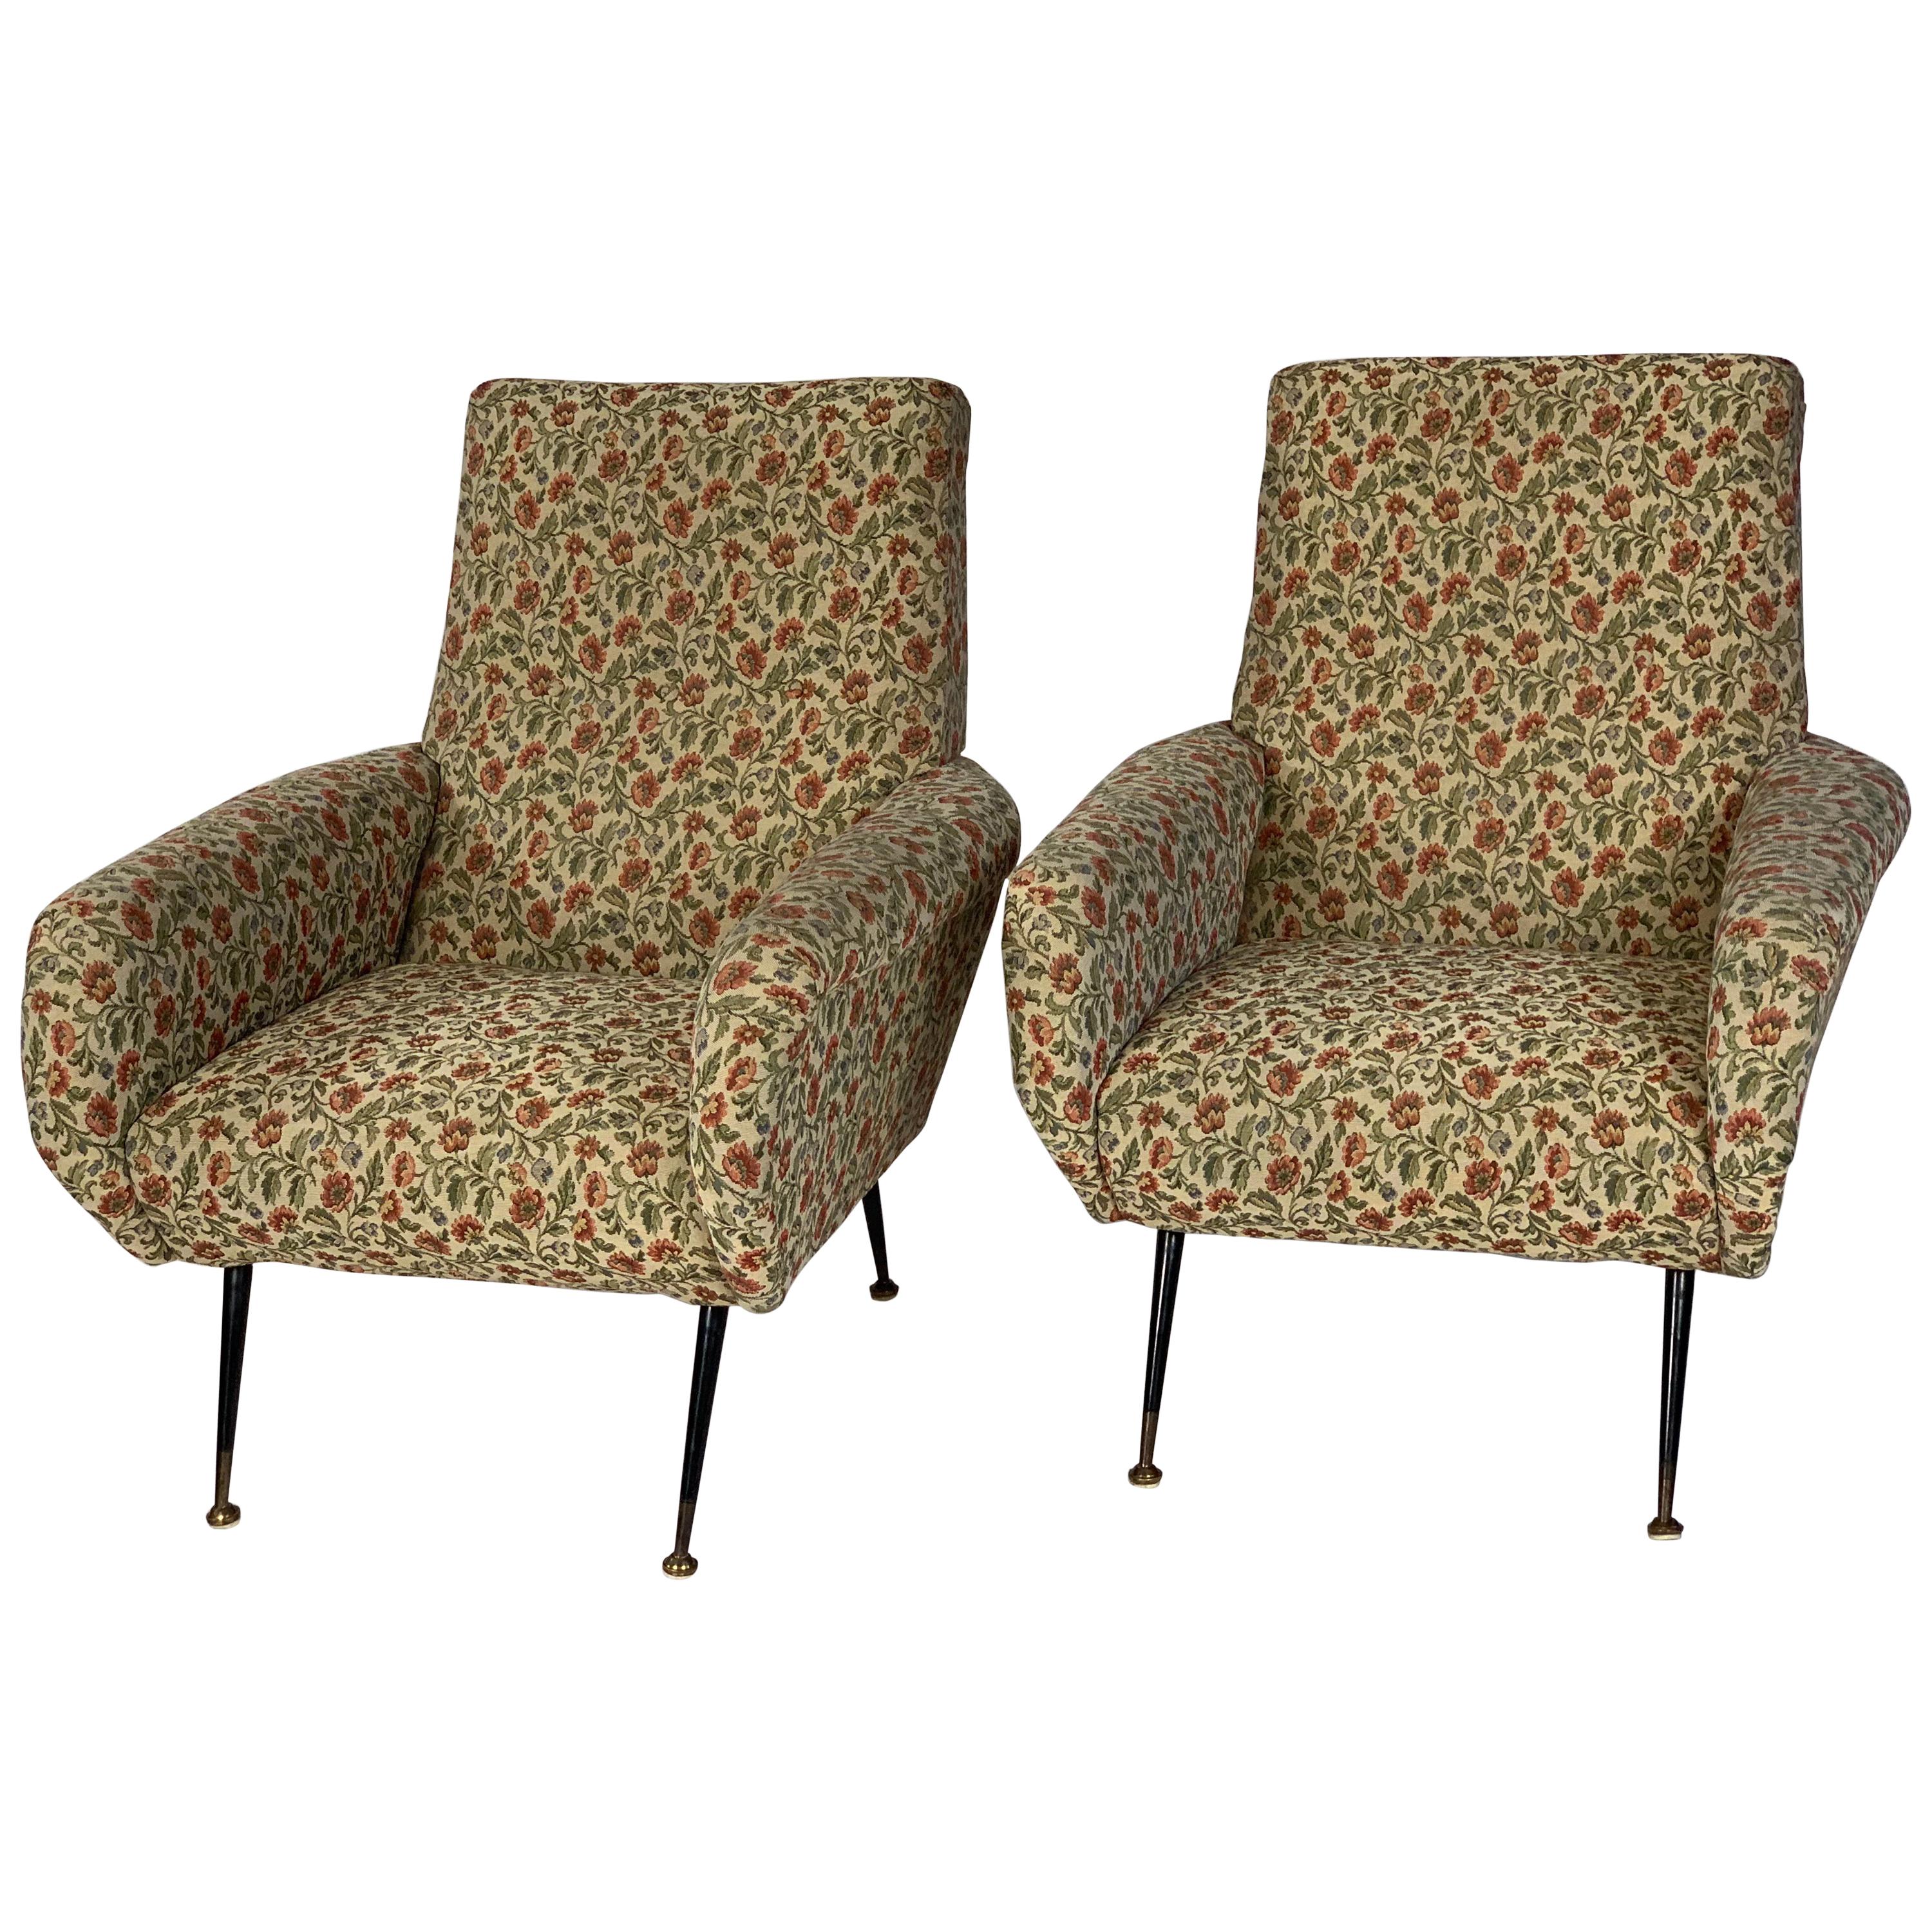 Pair of Italian Mid-Century Modern Lounge Chairs with Metal Legs